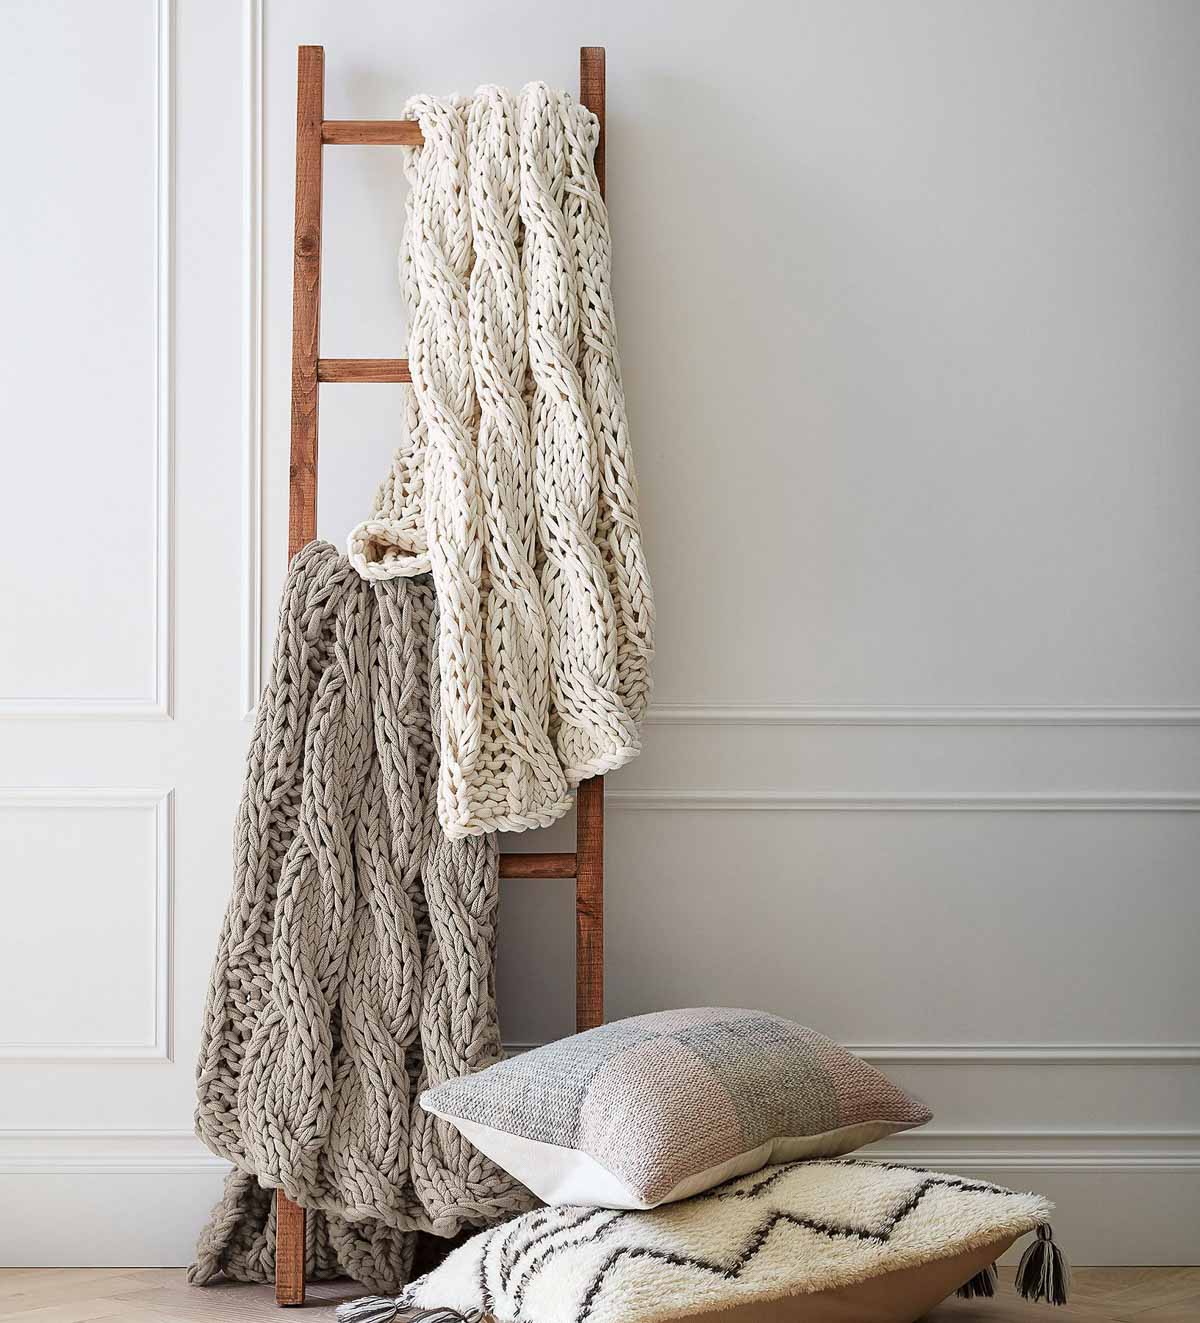 Rustic reclaimed ladder with blankets on rungs